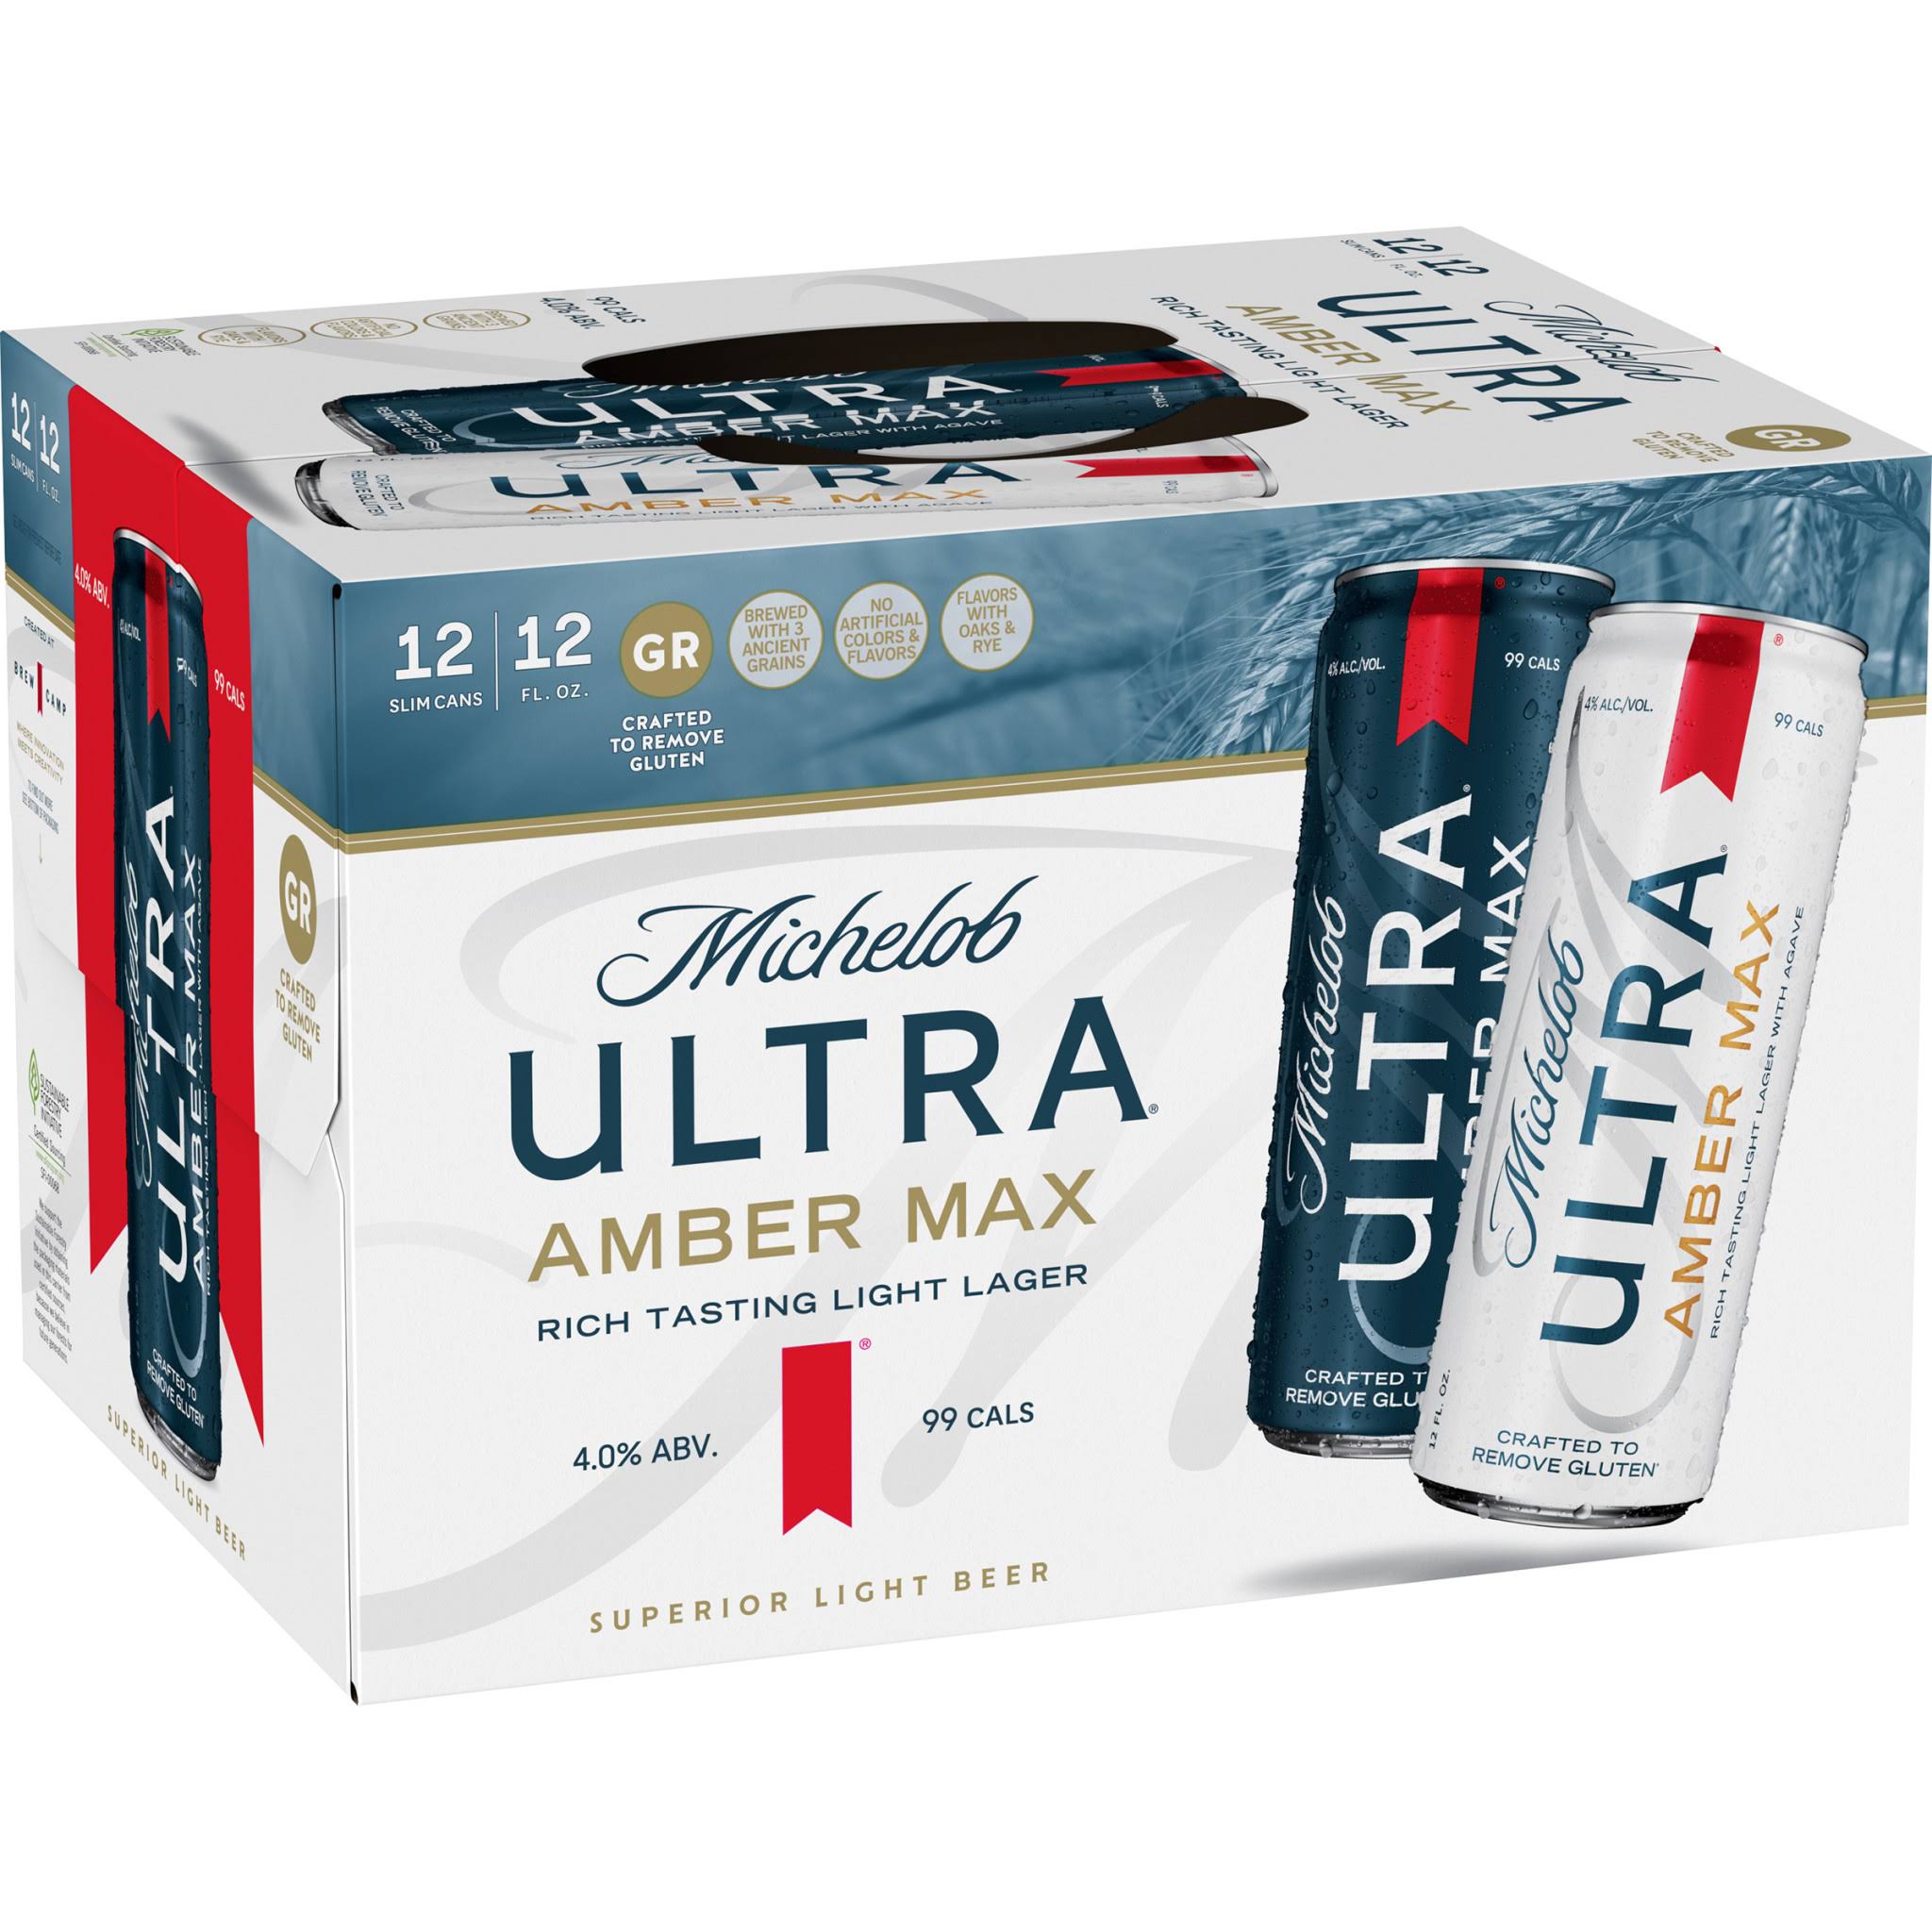 Michelob Ultra Beer, Amber Max, Superior Light - 12 pack, 12 fl oz slim cans